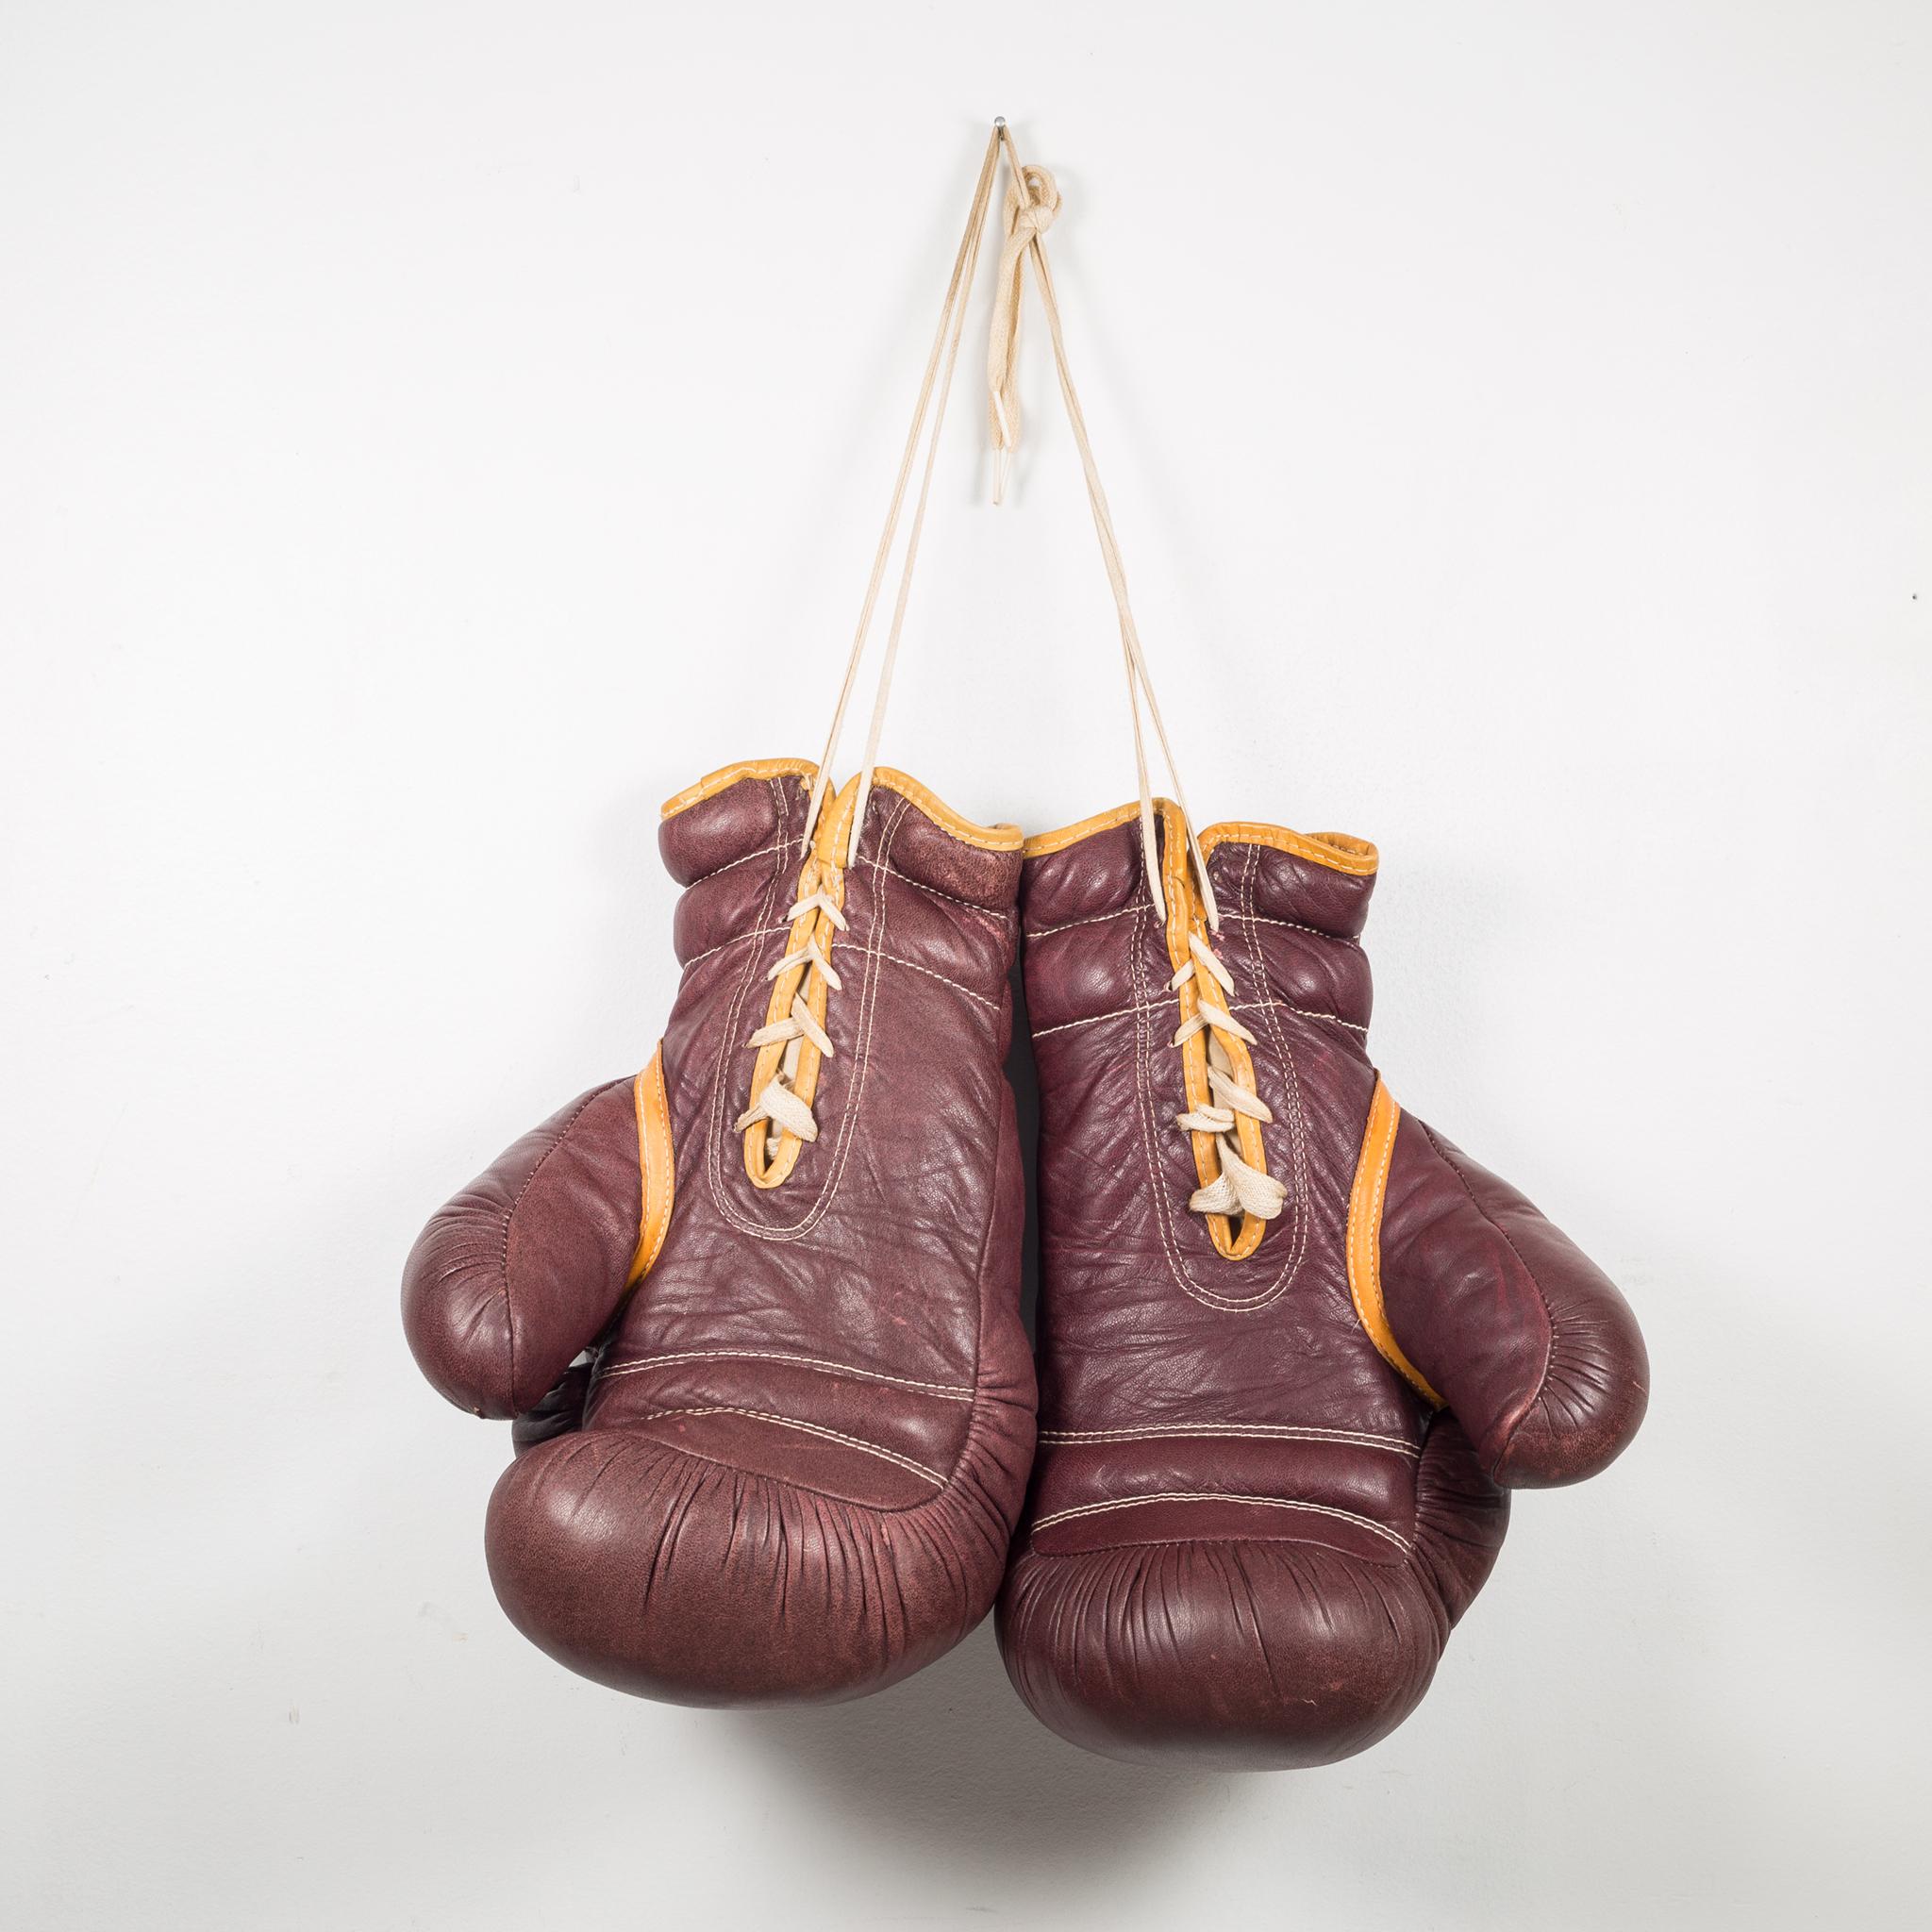 Fabric Leather MacGregor Boxing Gloves, circa 1950